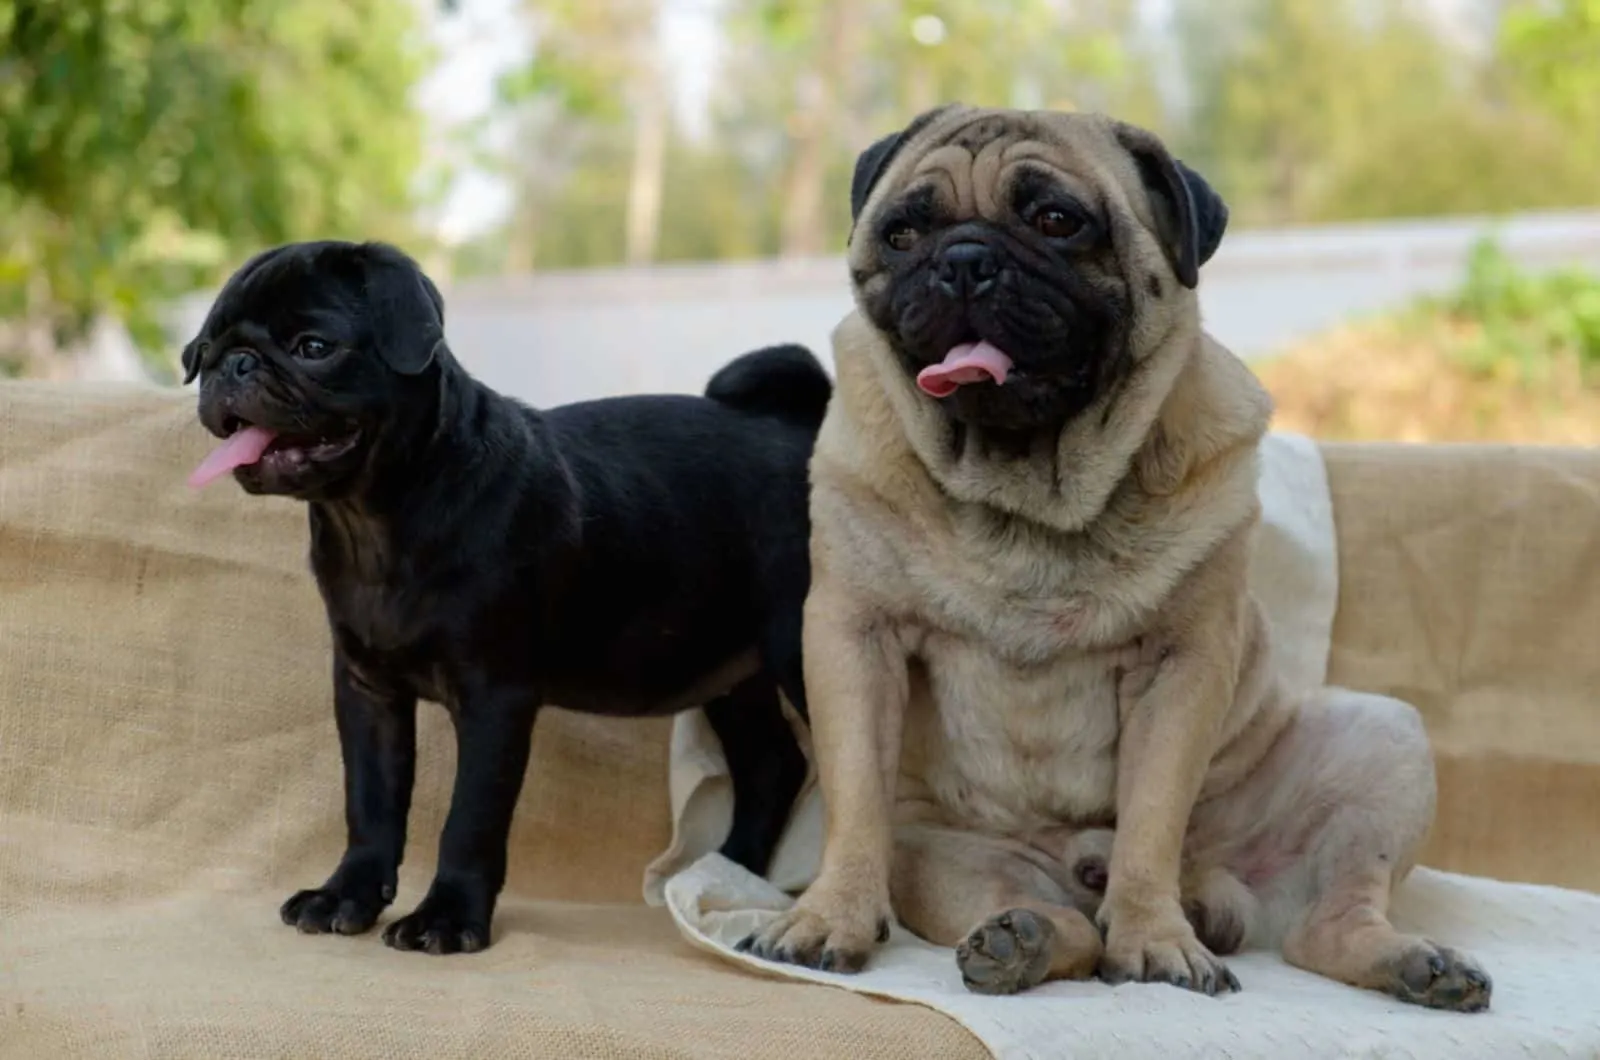 puppy and adult pug sitting together